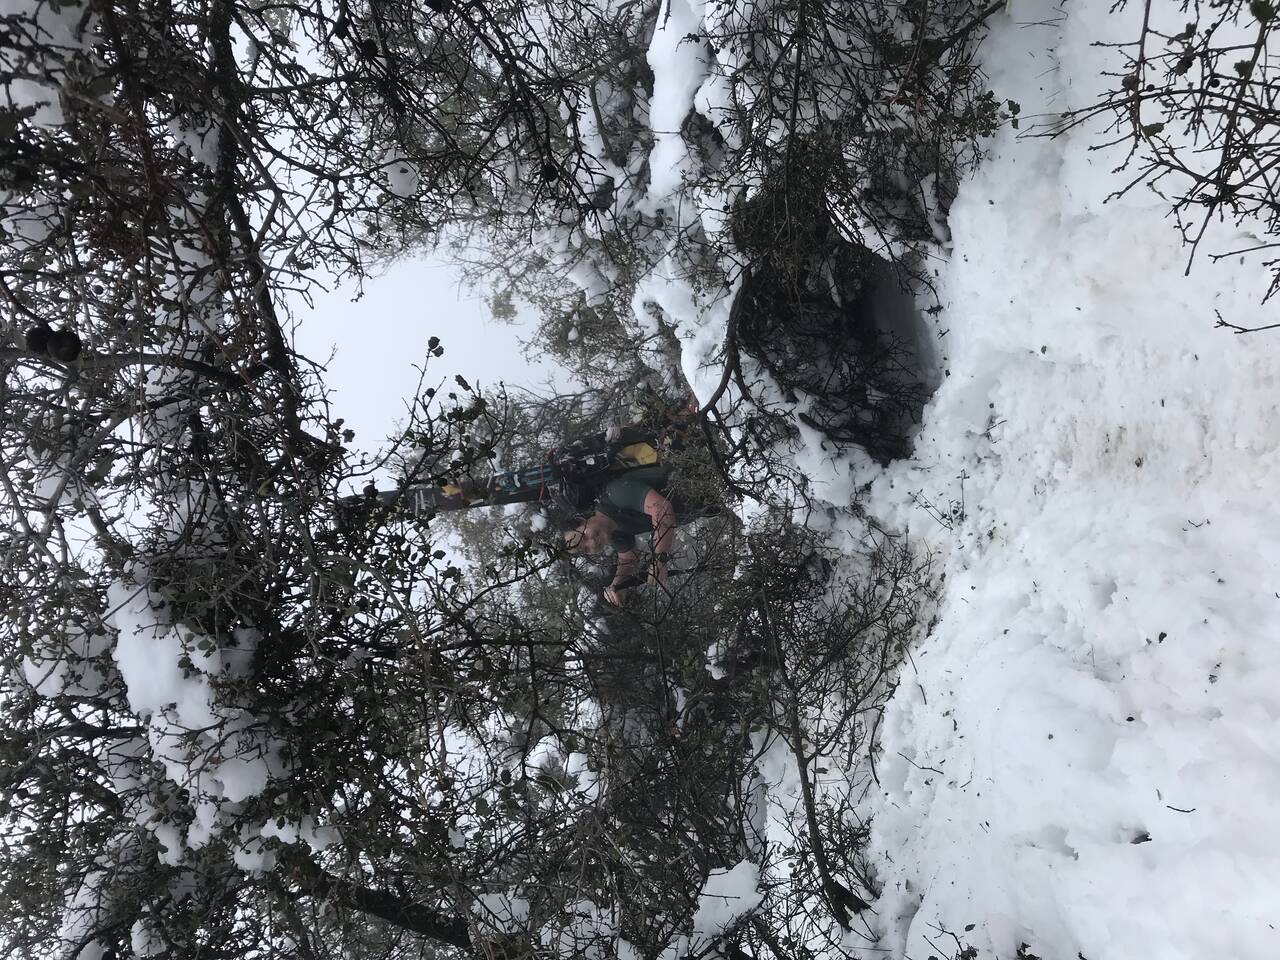 A skier ascends the trail, crawling through brush